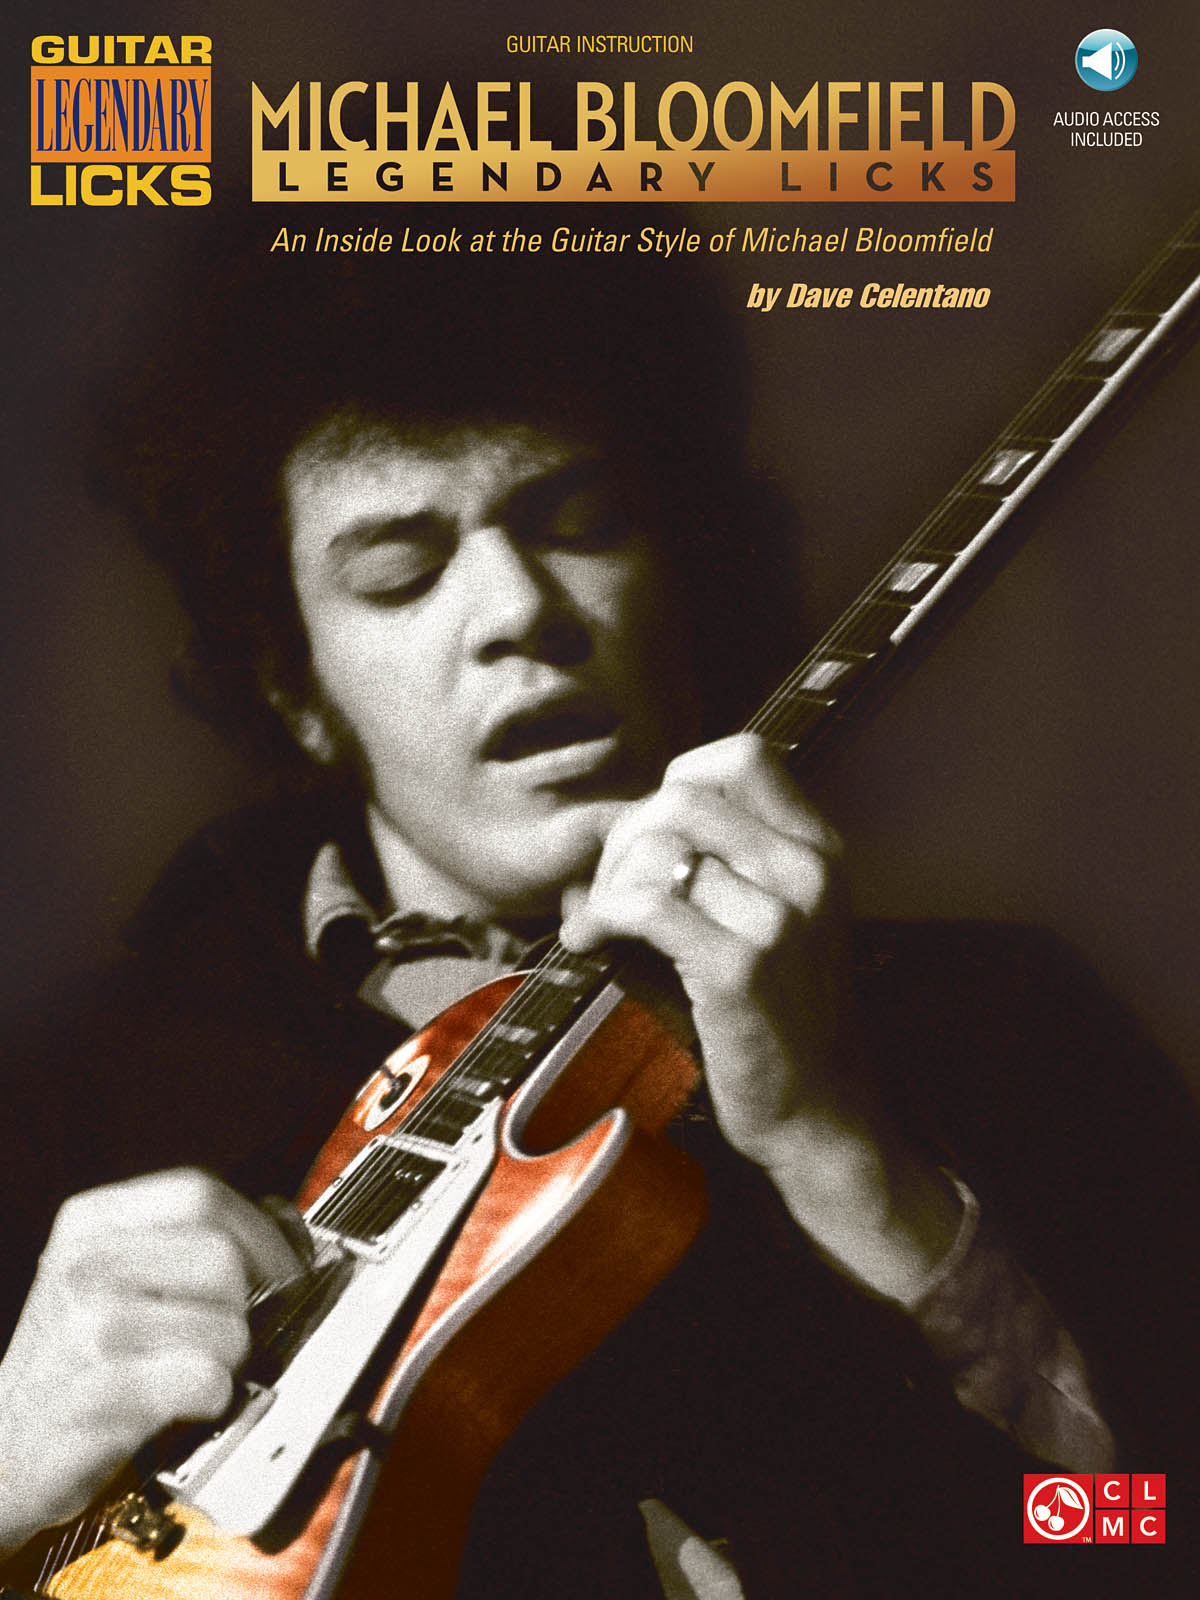 Mike Bloomfield - Legendary Licks - An Inside Look at the Guitar Style of Mike Bloomfield - písně na kytaru s TAB